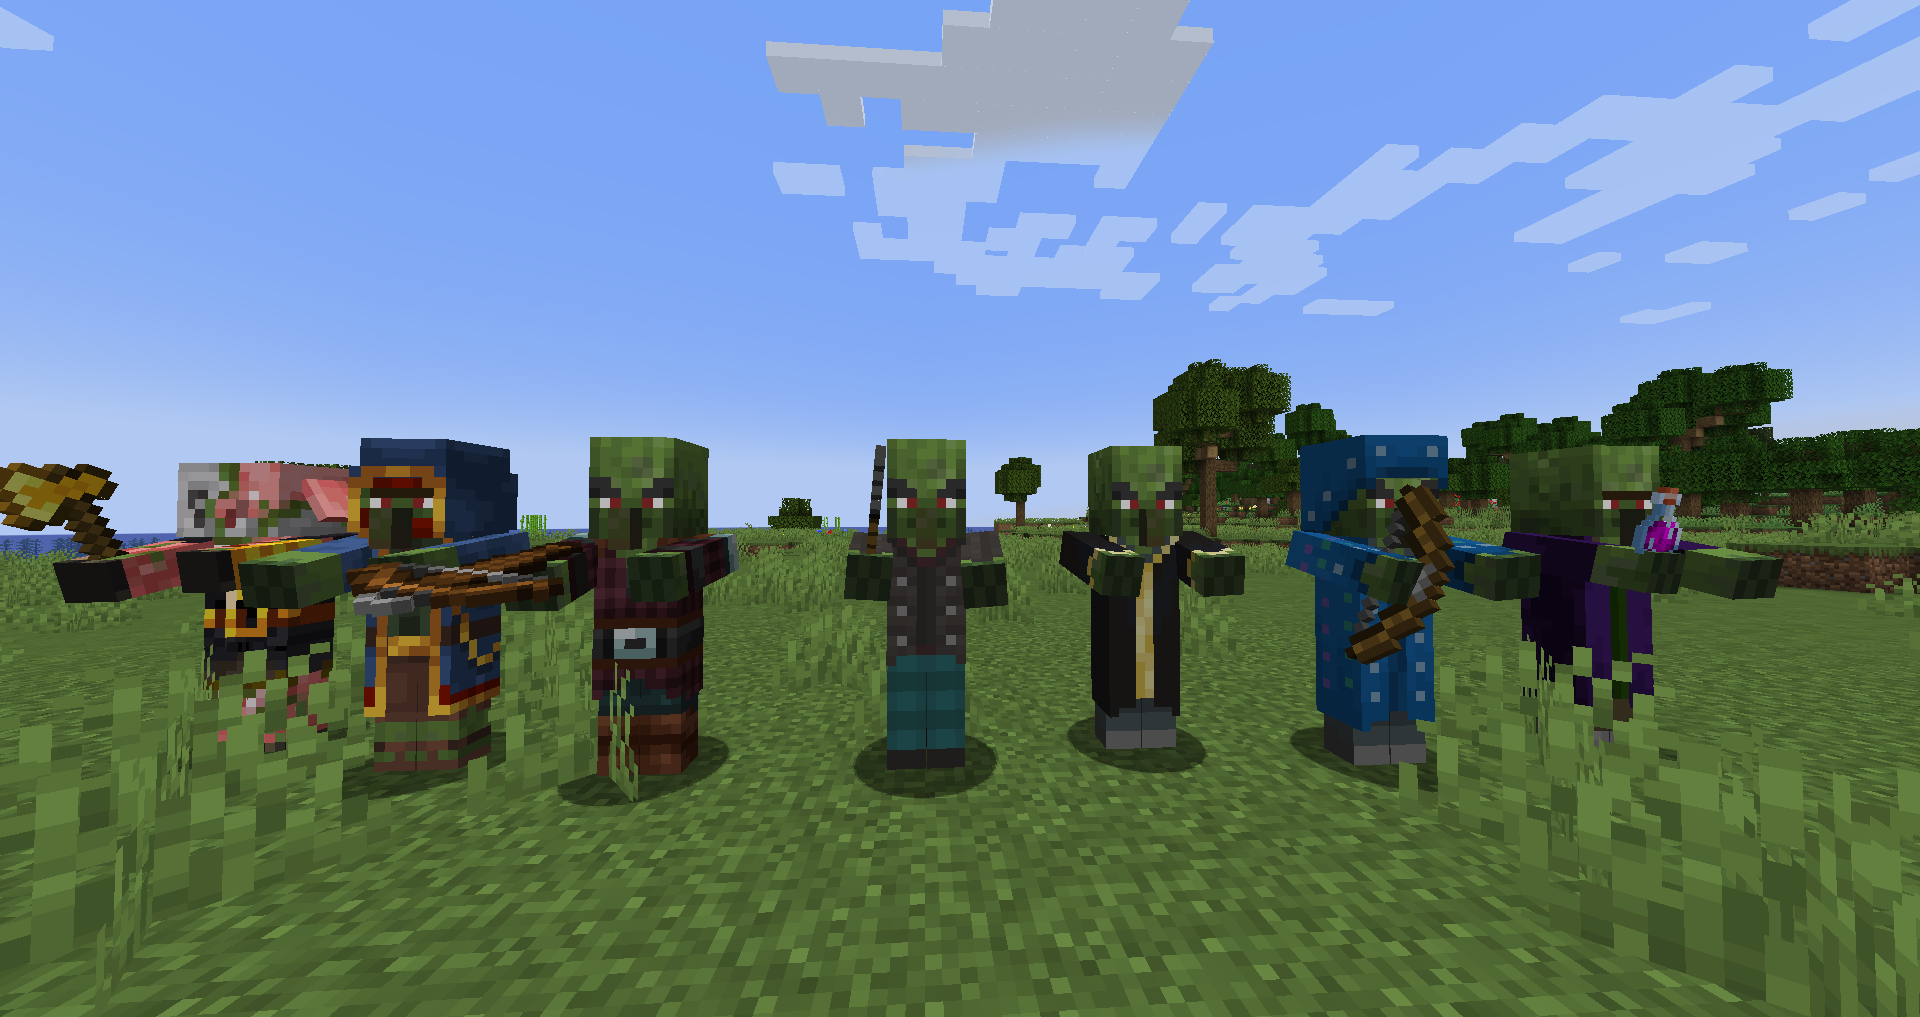 Zombified Illagers